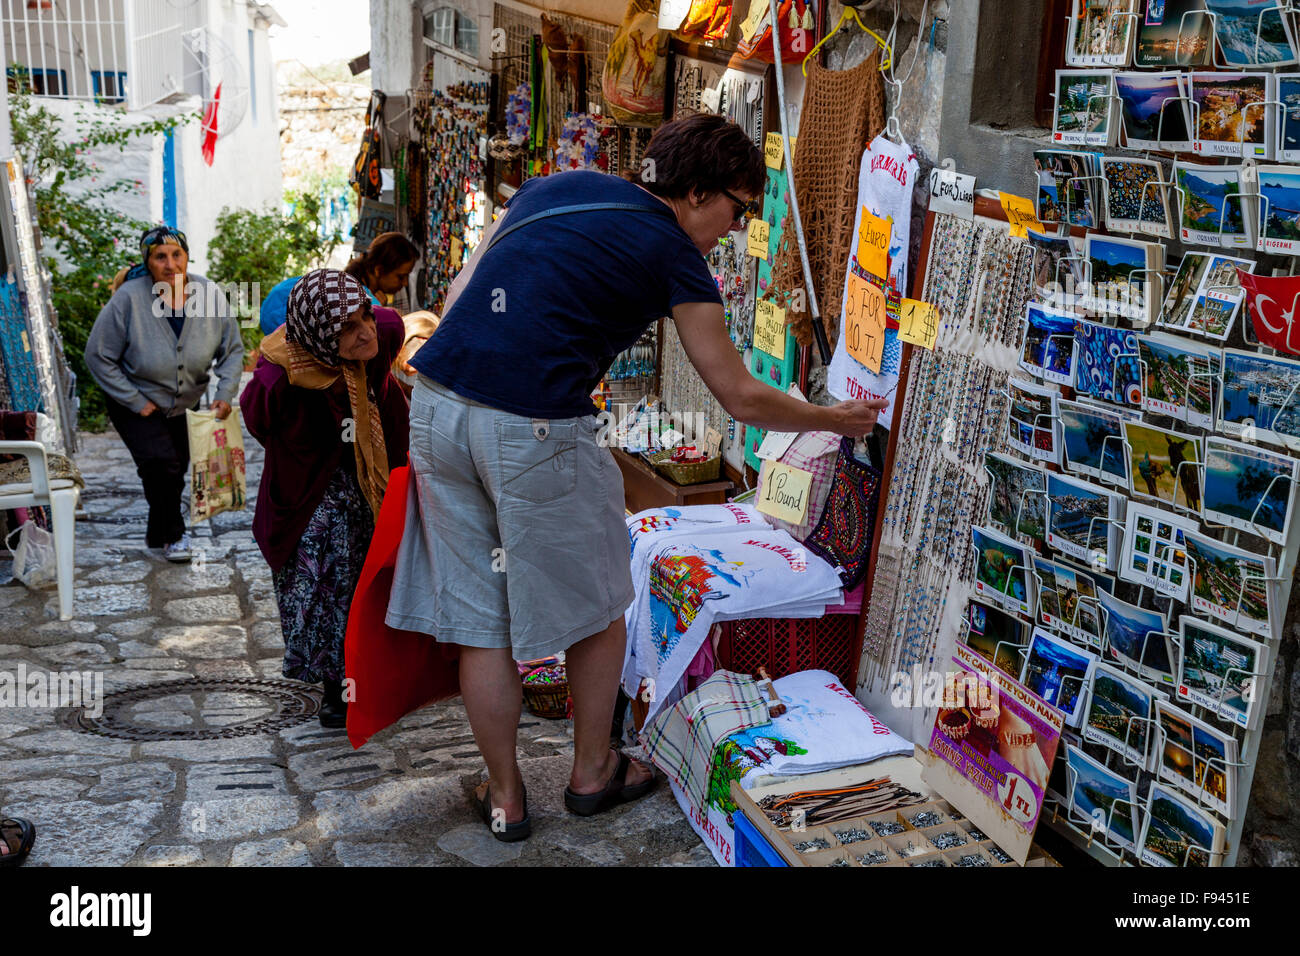 Tourists Buying Souvenirs From A Gift Shop In The Old Town Of Marmaris, Mugla Province, Turkey Stock Photo